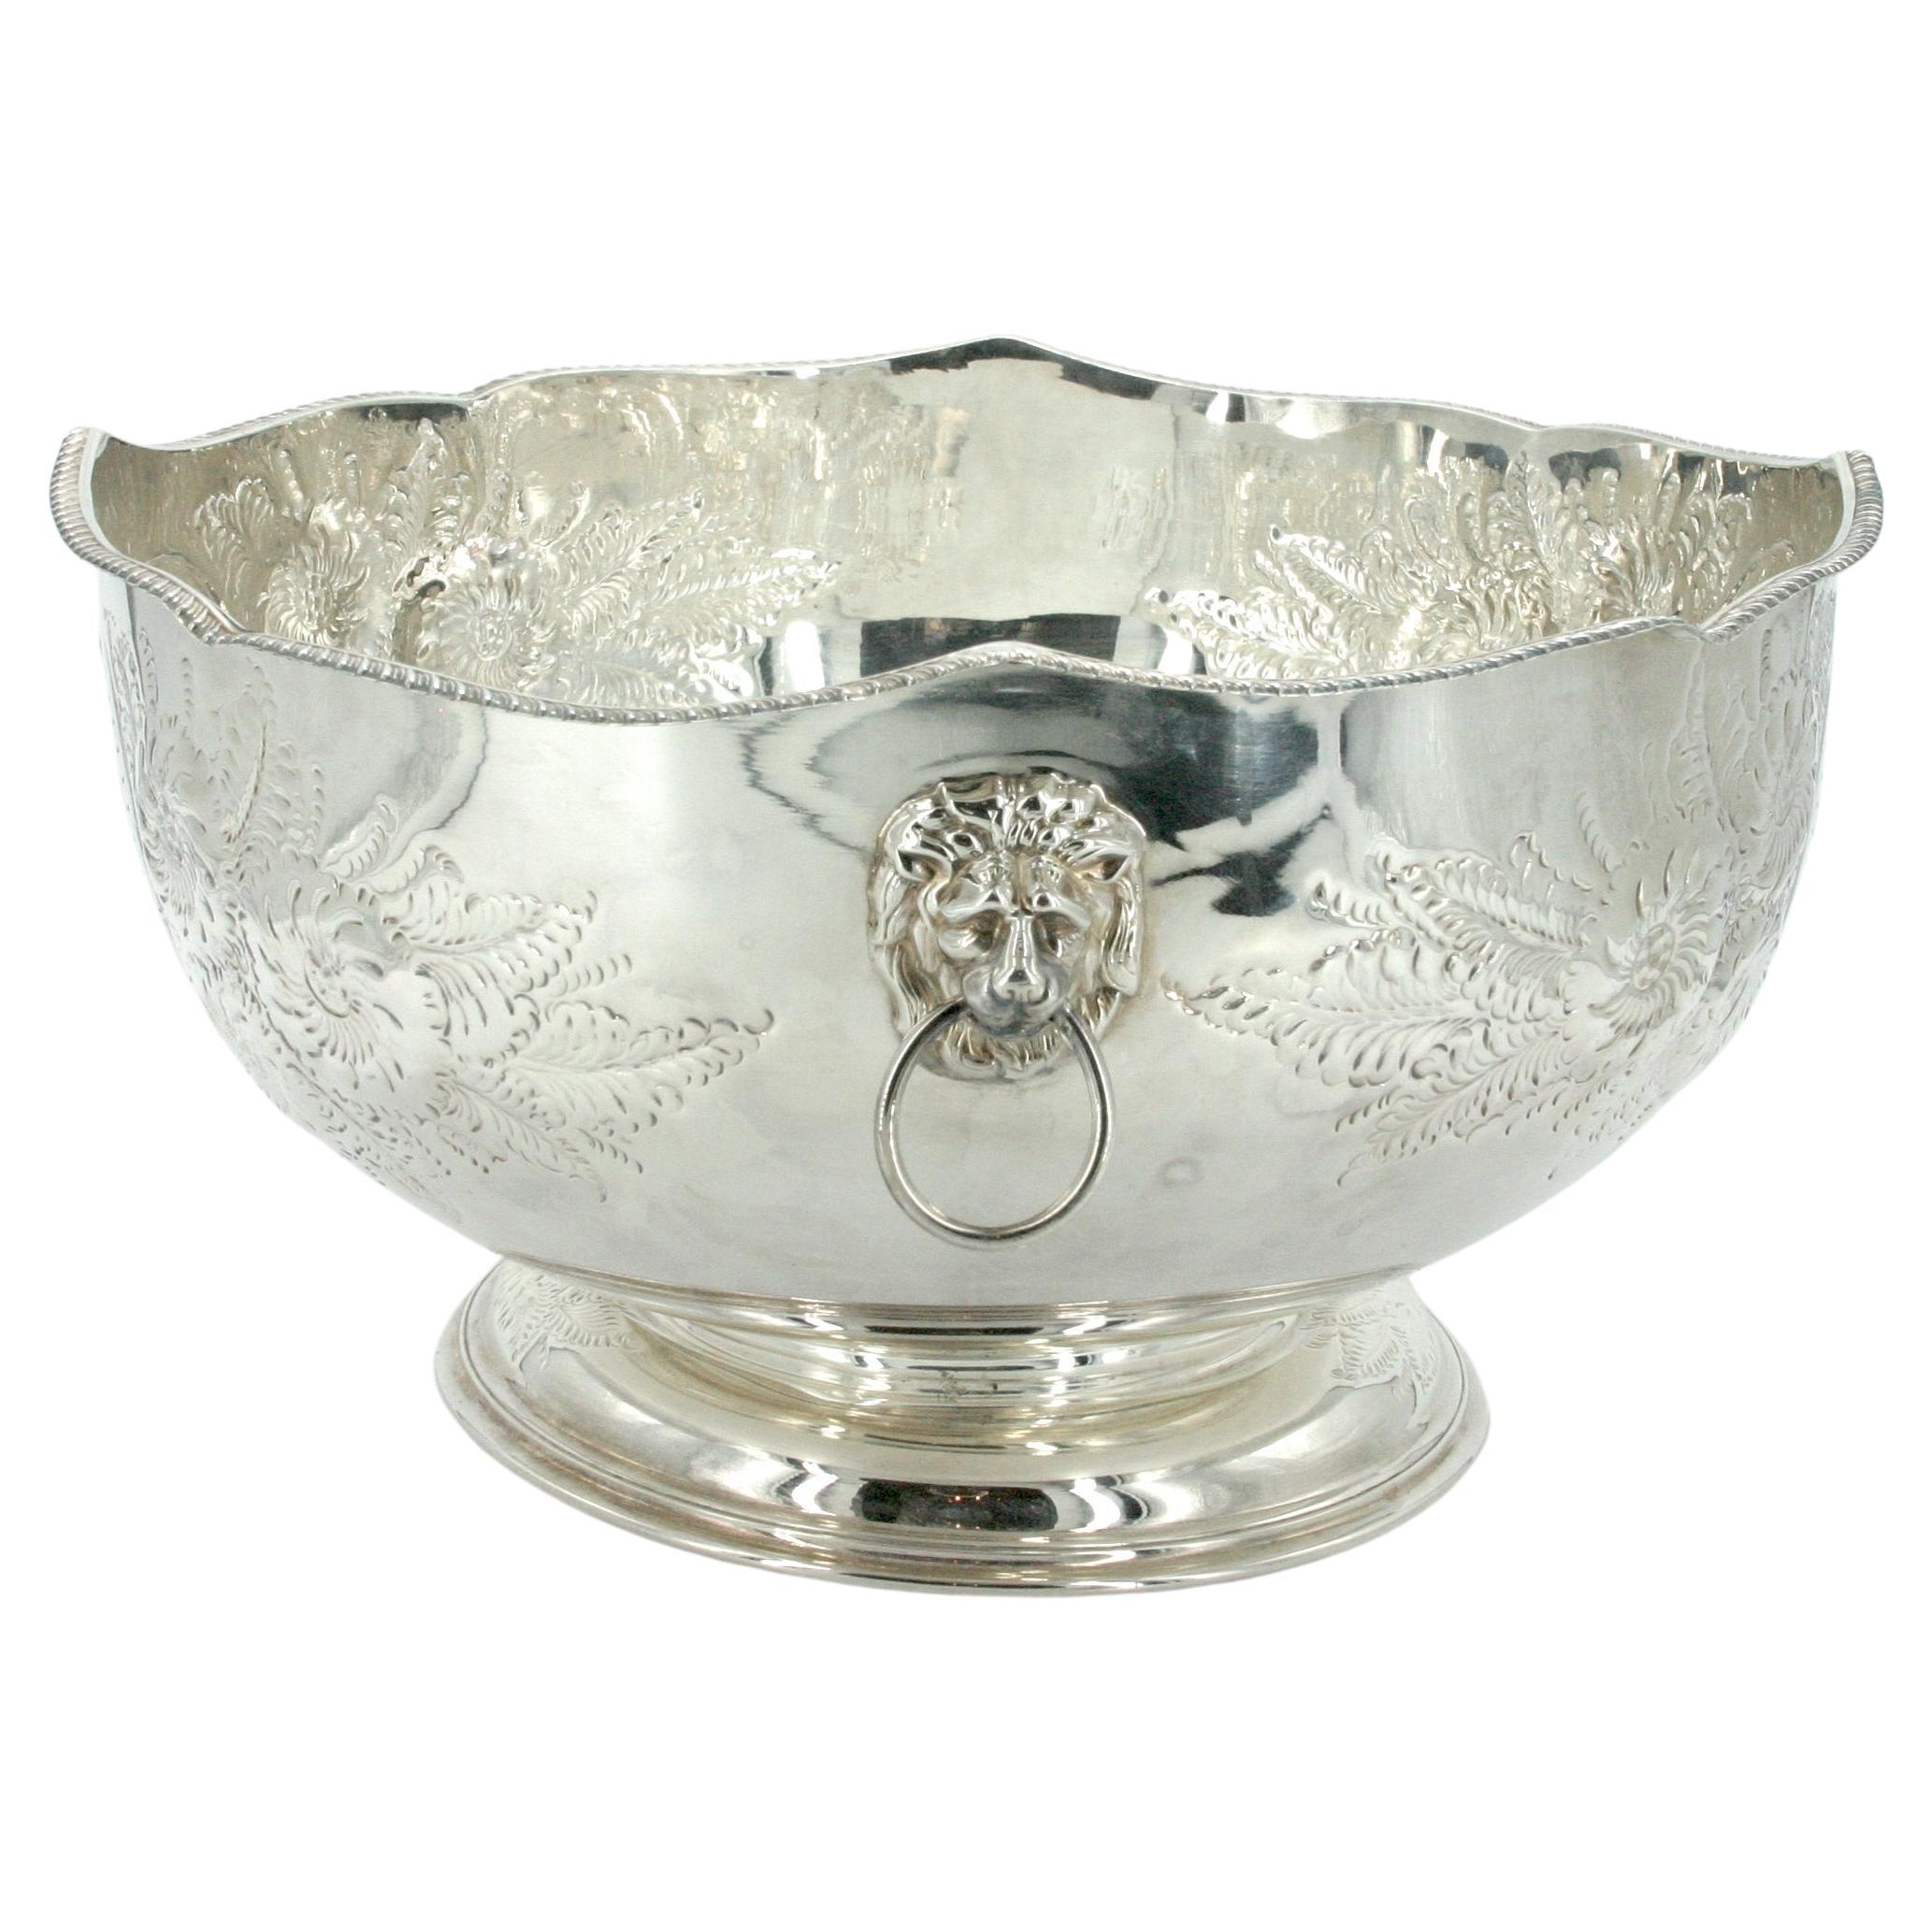 Large English Sheffield silver plate barware/tableware centerpiece punch bowl in the victorian style . The punch bowl features intricate exterior floral design resting on a round base in elegant proportions with Lion Head side handle . Great